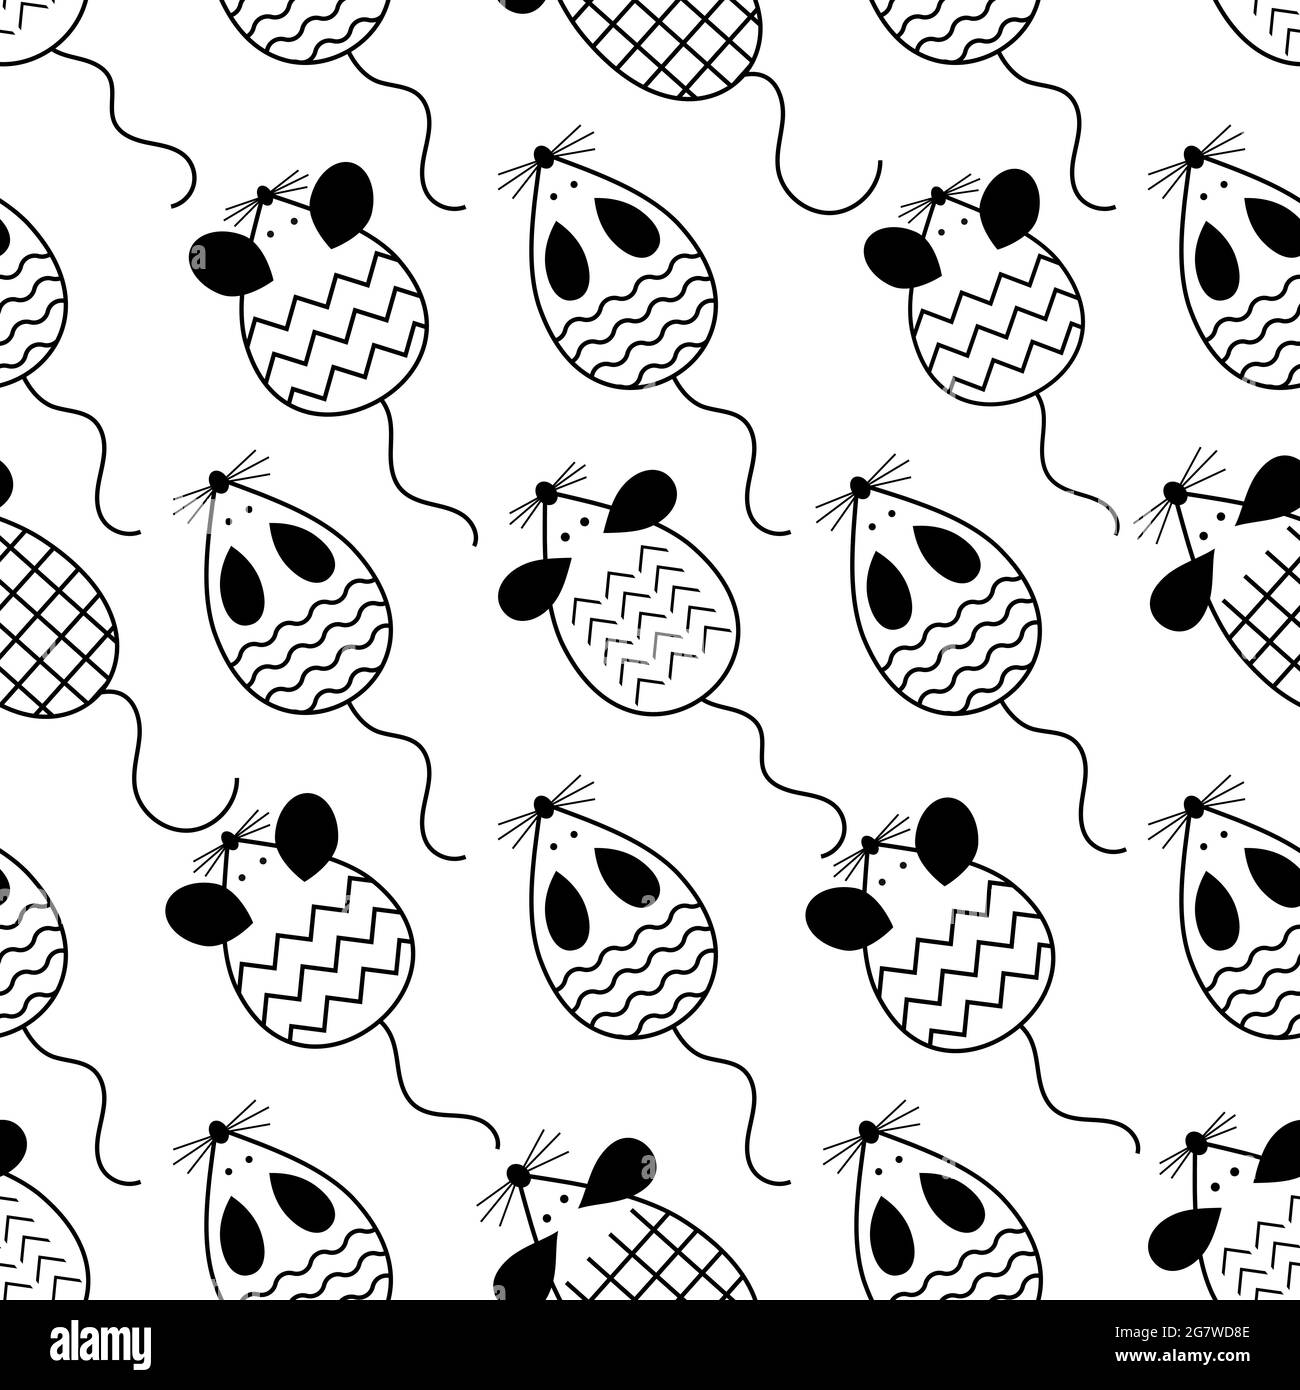 https://c8.alamy.com/comp/2G7WD8E/mouse-or-cute-little-rat-seamless-pattern-on-white-background-2G7WD8E.jpg